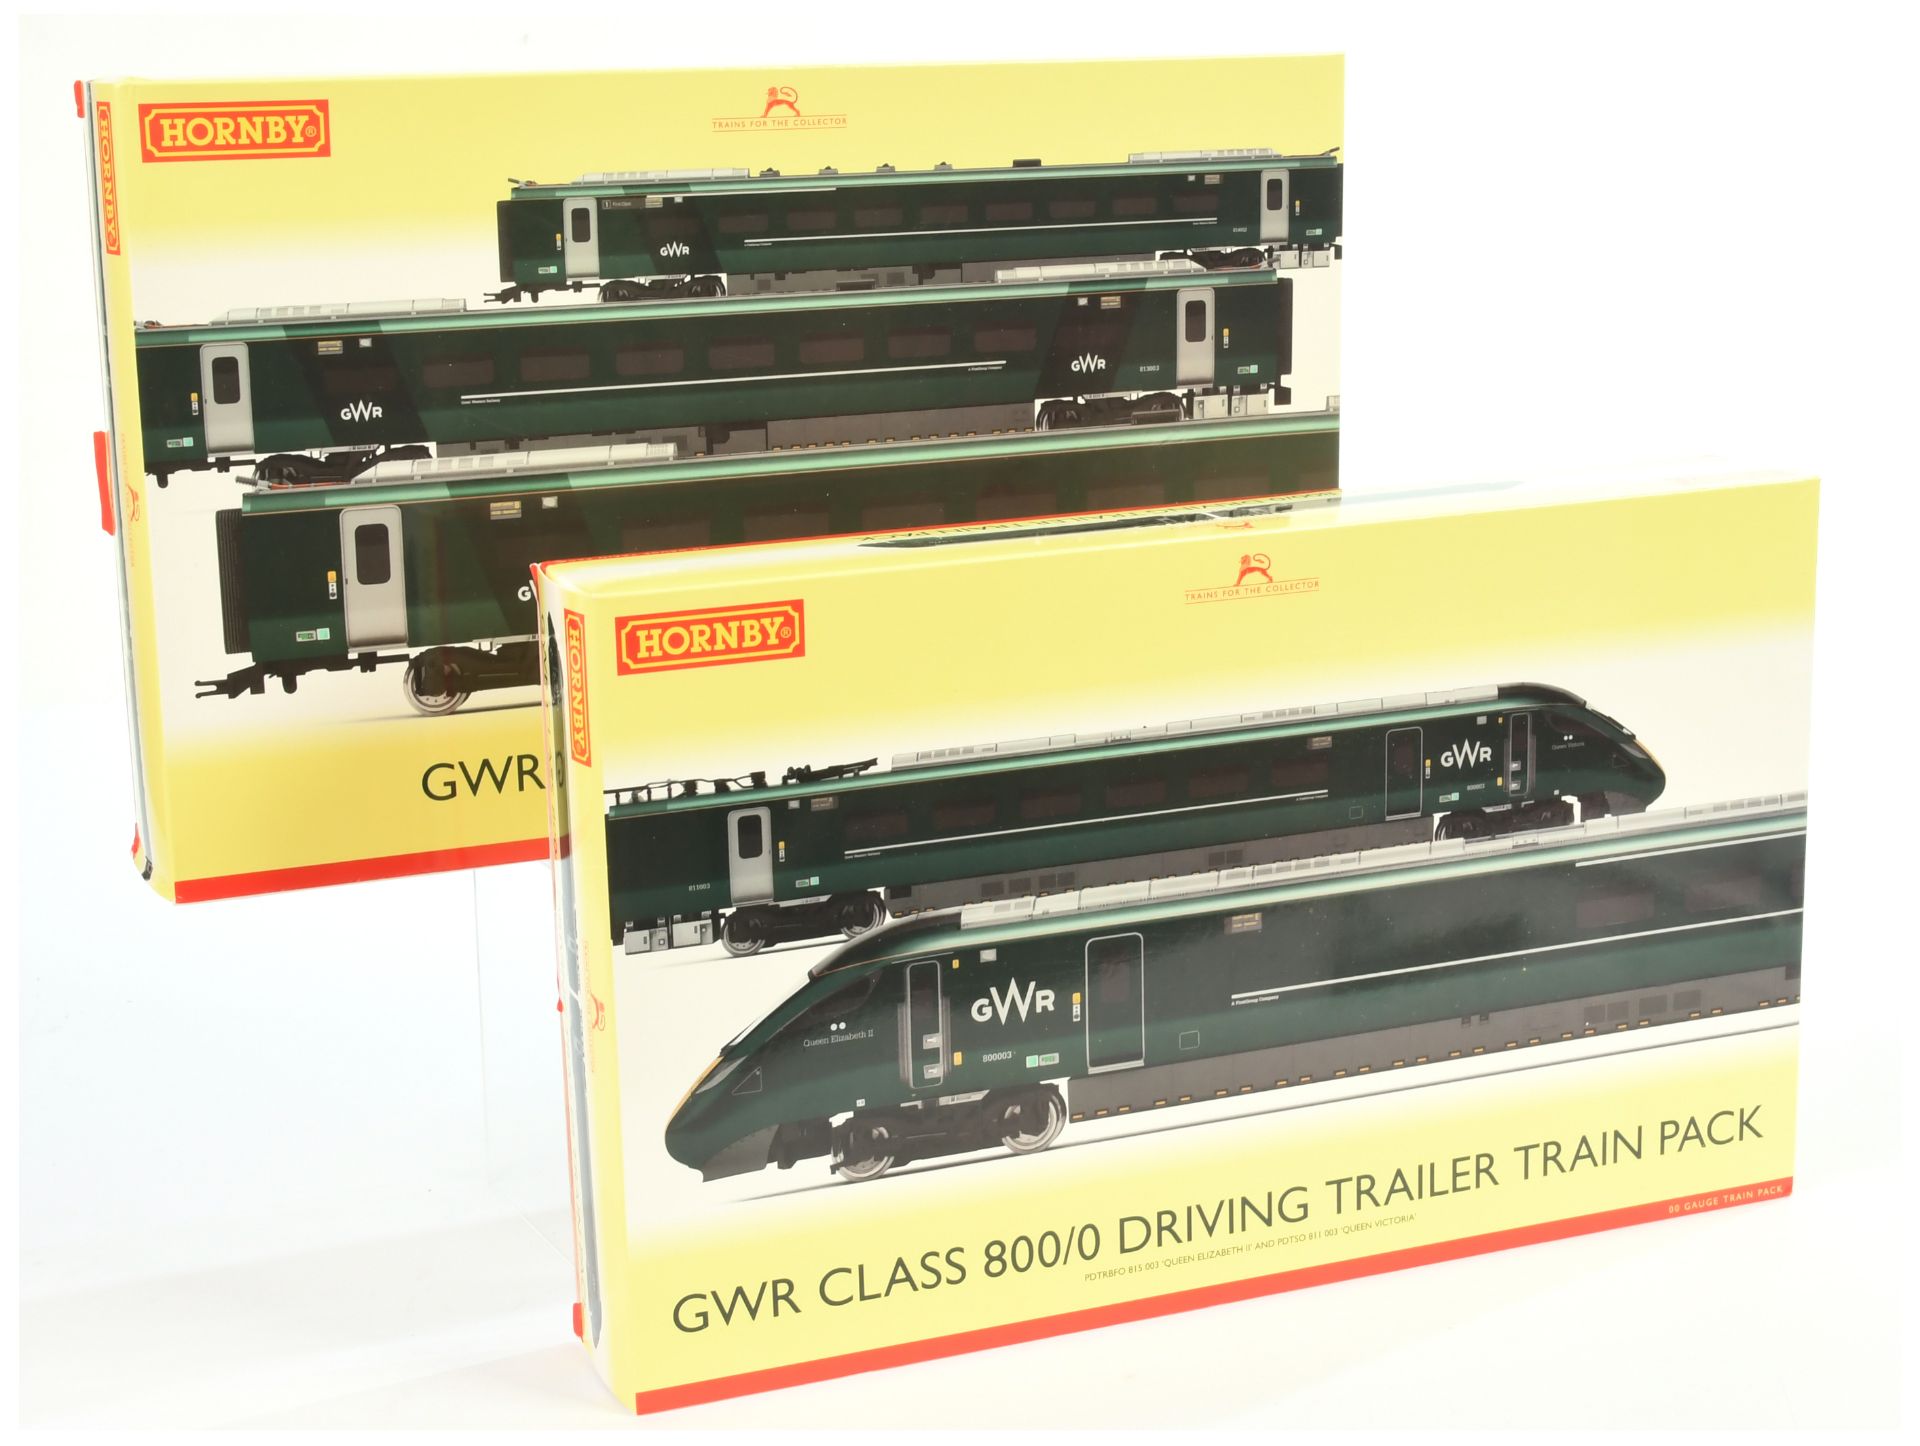 Hornby (China) R3609 GWR green livery 5-car Class 800/0